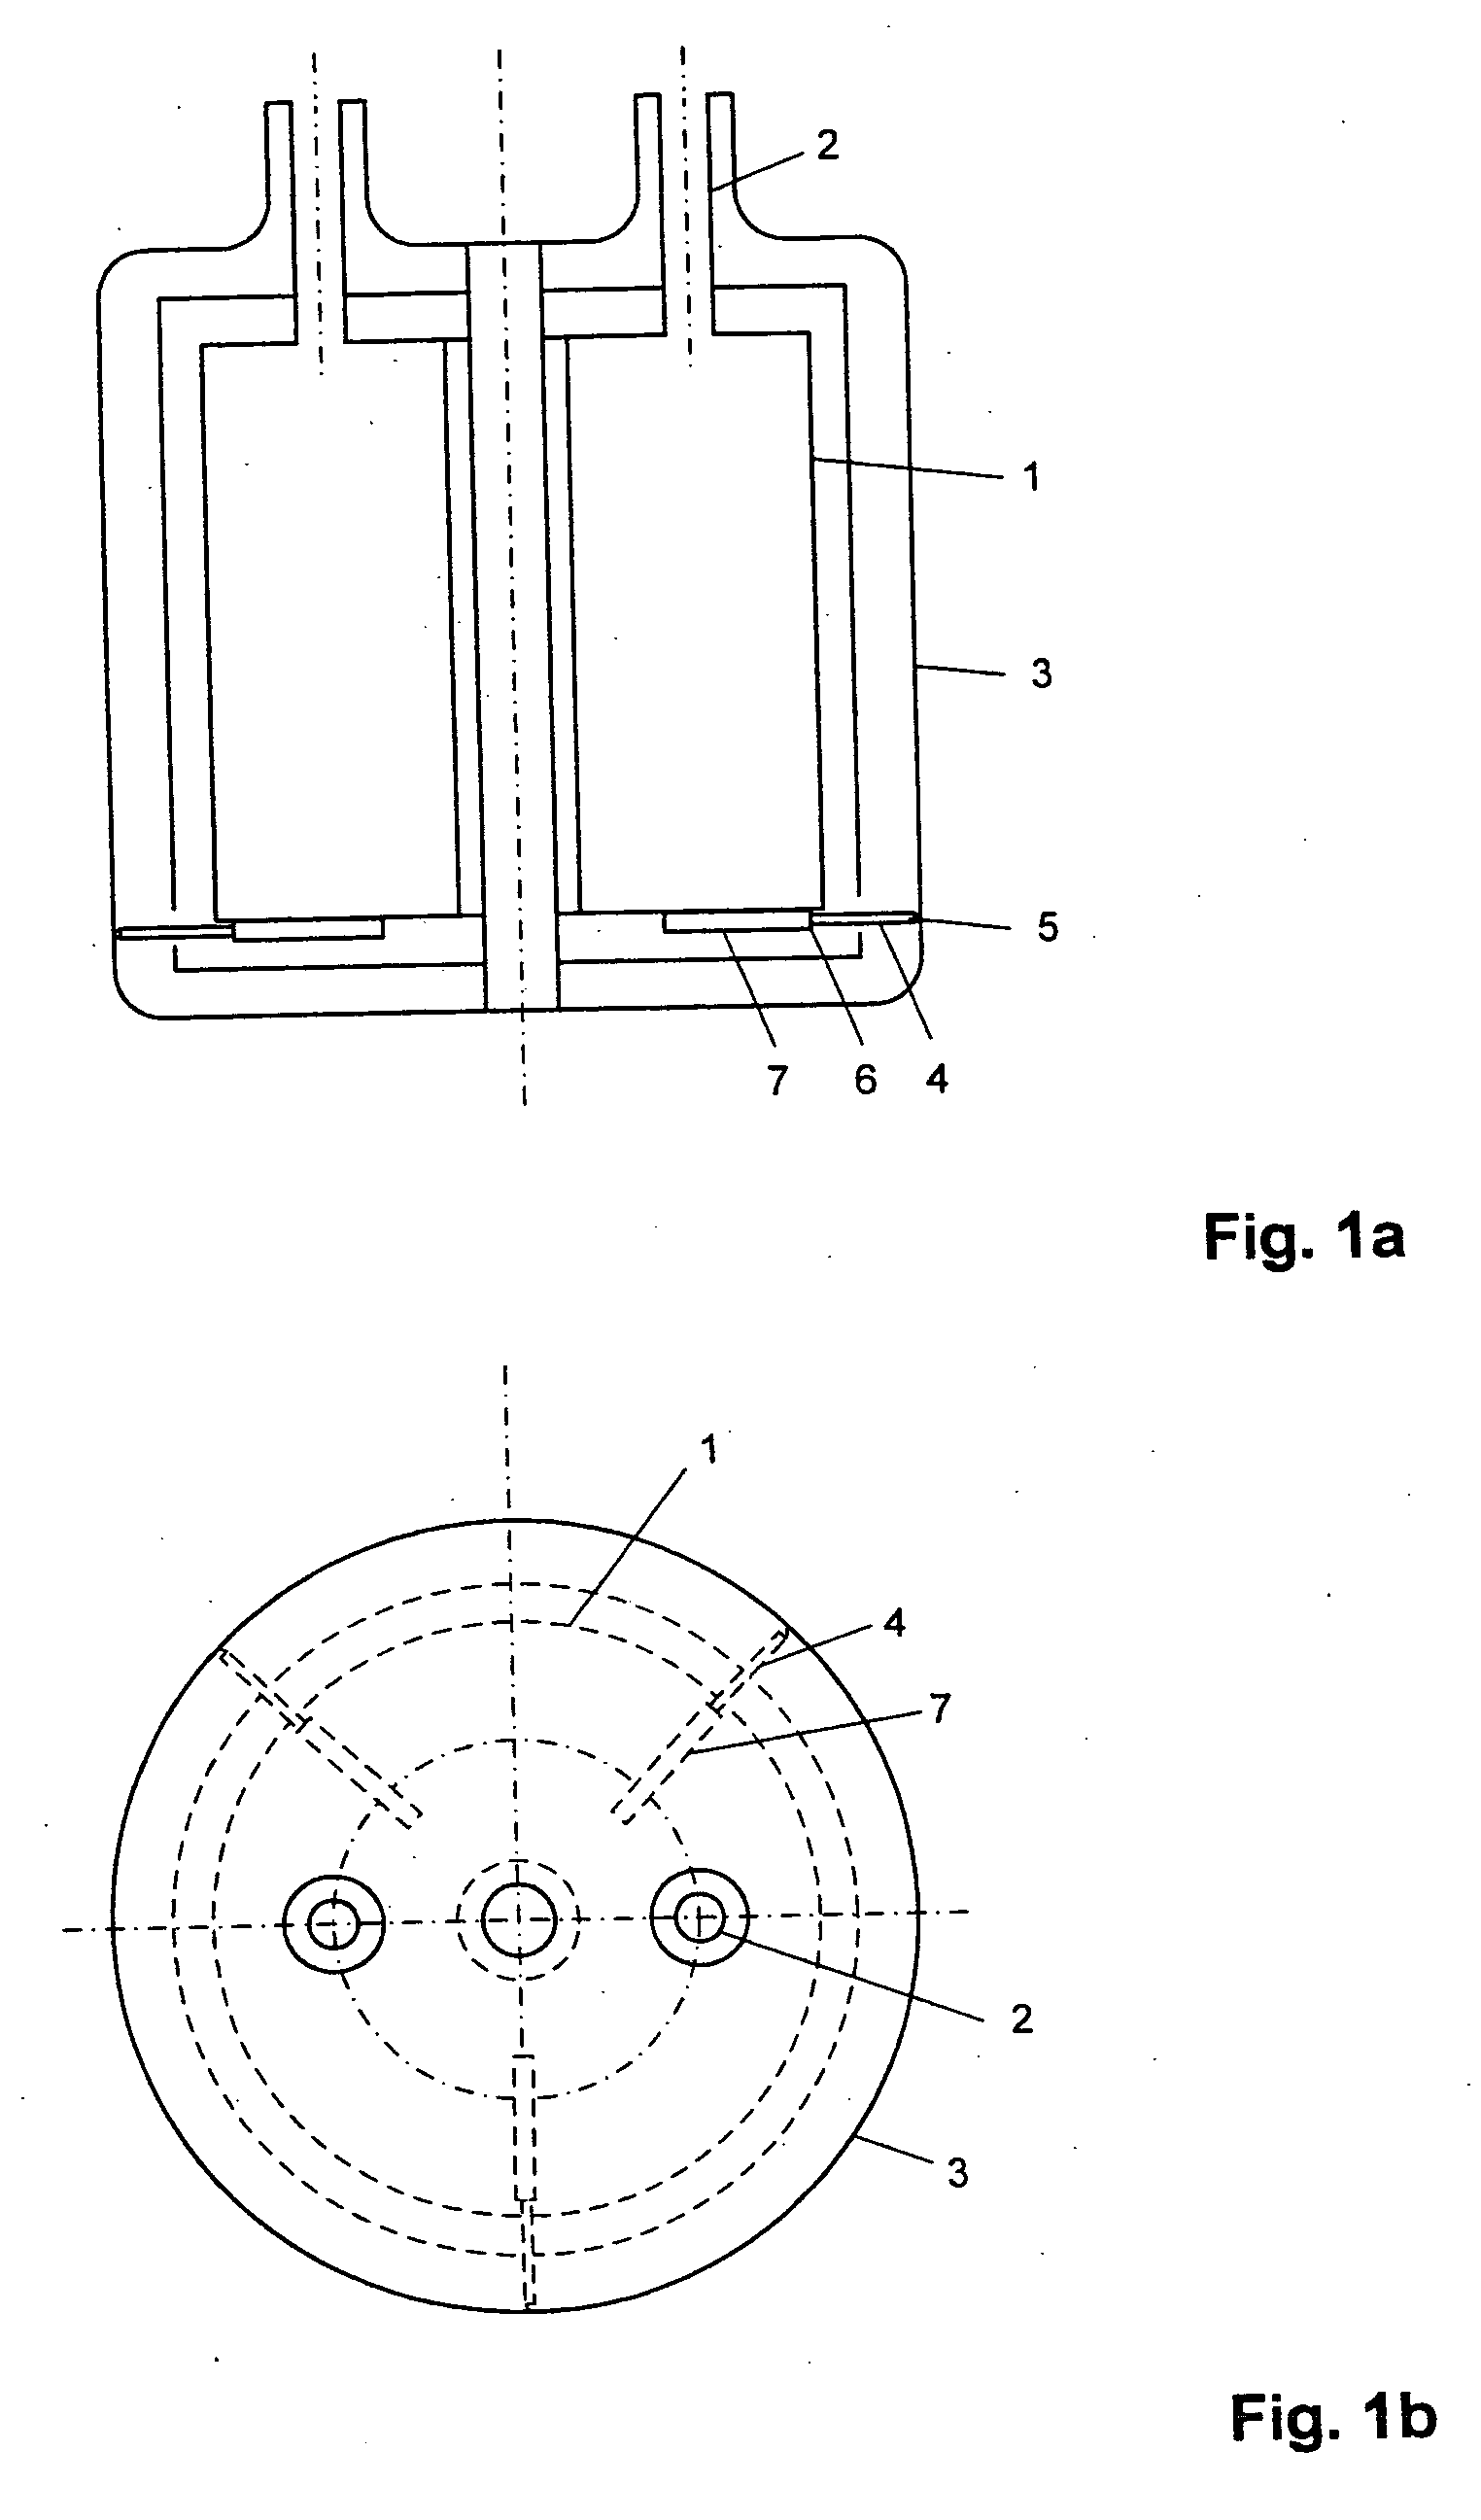 Cryostat configuration with thermally compensated centering